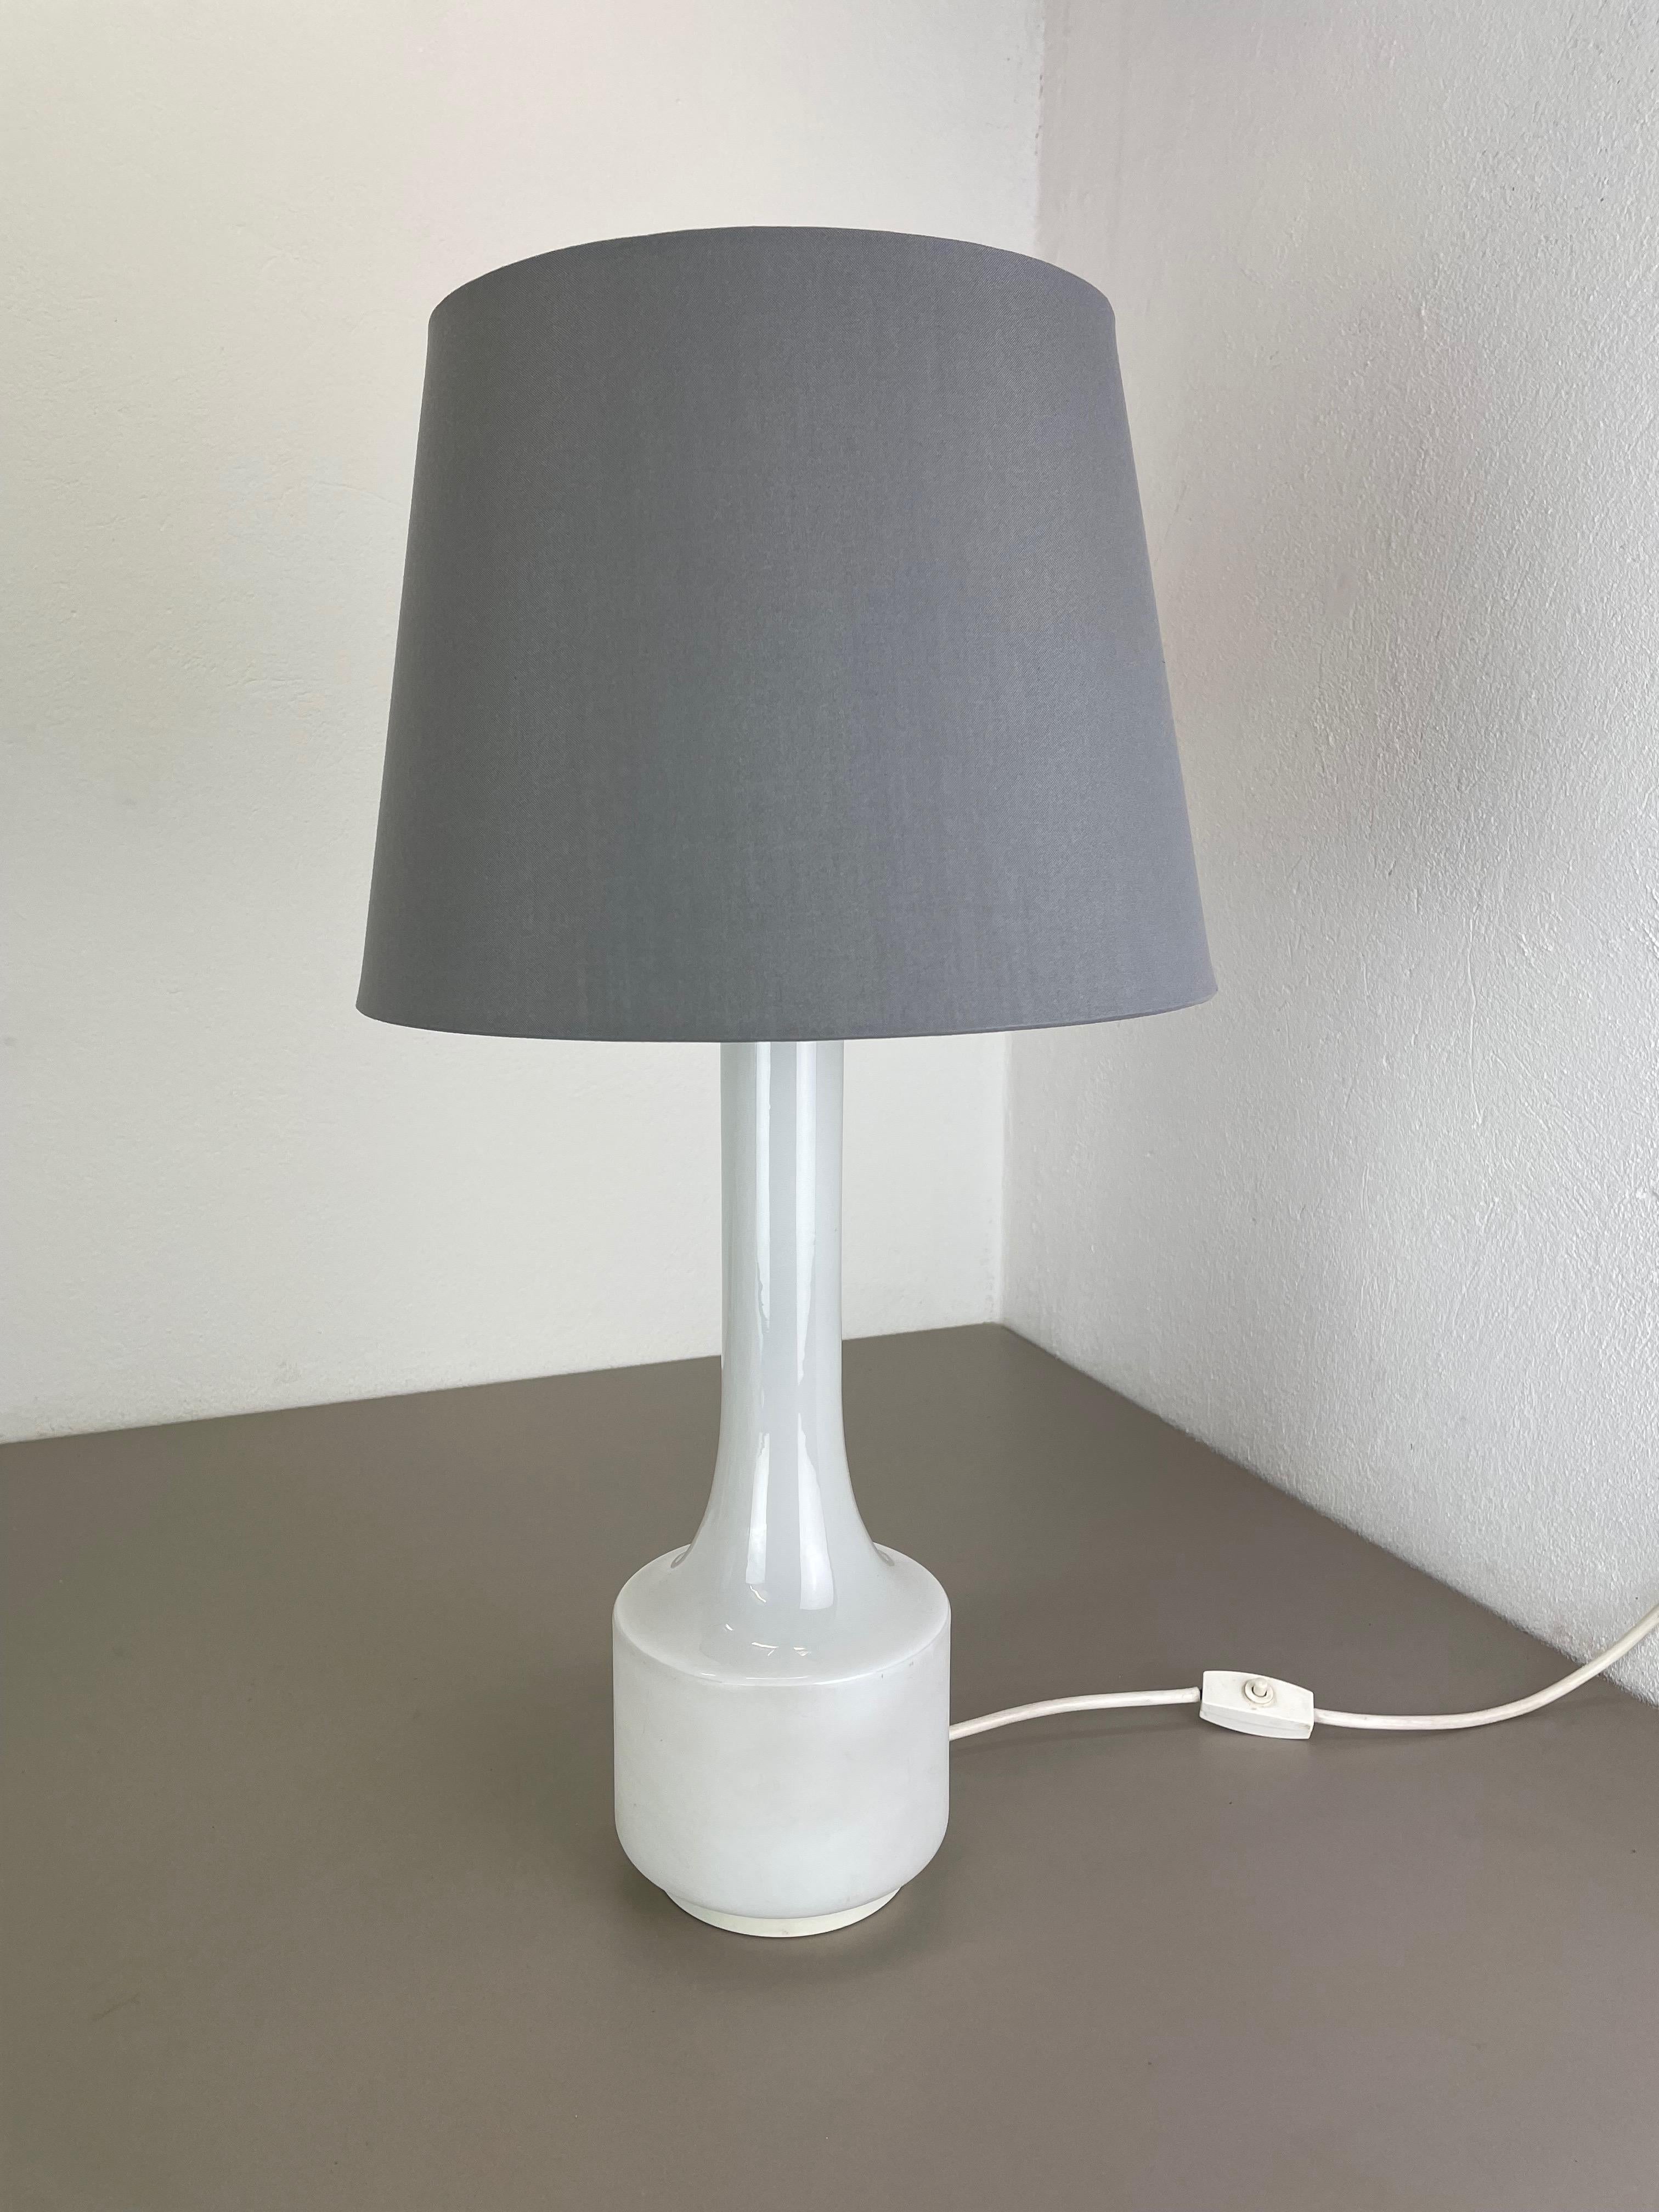 Article:

Table light


Producer:

Doria lights, Germany


Origin:

Germany



Age:

1970s



This vintage table light was made by Doria lights in Germany in the 1970d The light base is made of white glass on the bottom in